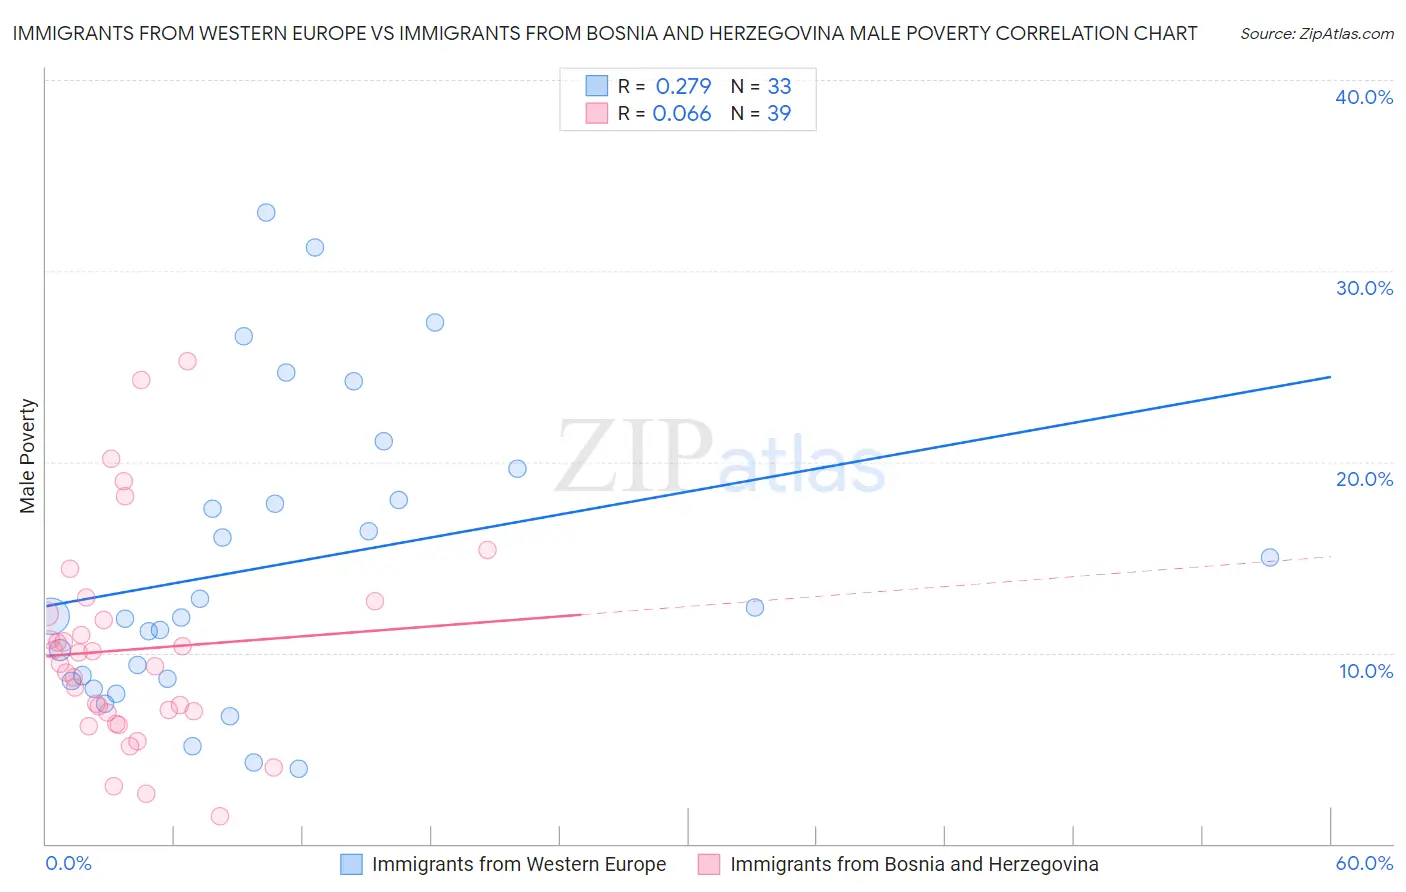 Immigrants from Western Europe vs Immigrants from Bosnia and Herzegovina Male Poverty